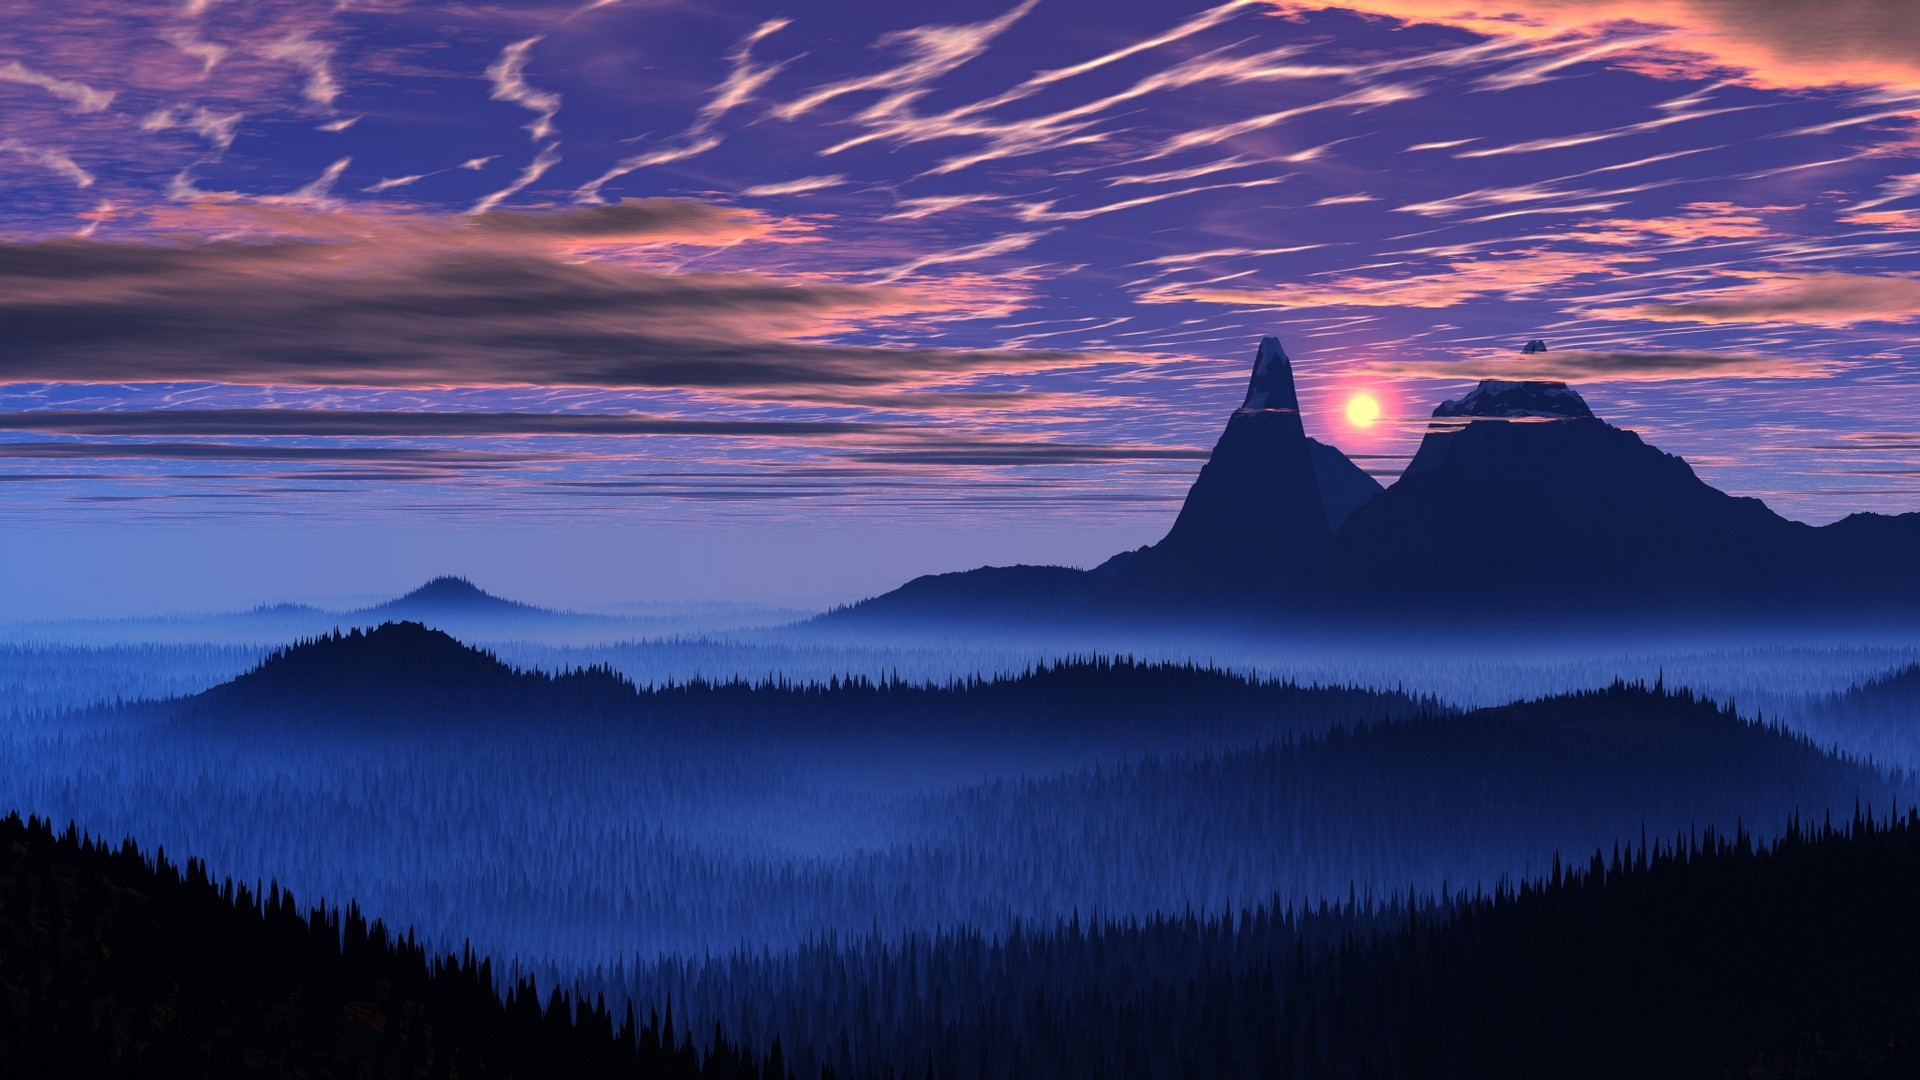 General 1920x1080 landscape nature blue mist sunset forest mountains sky clouds valley